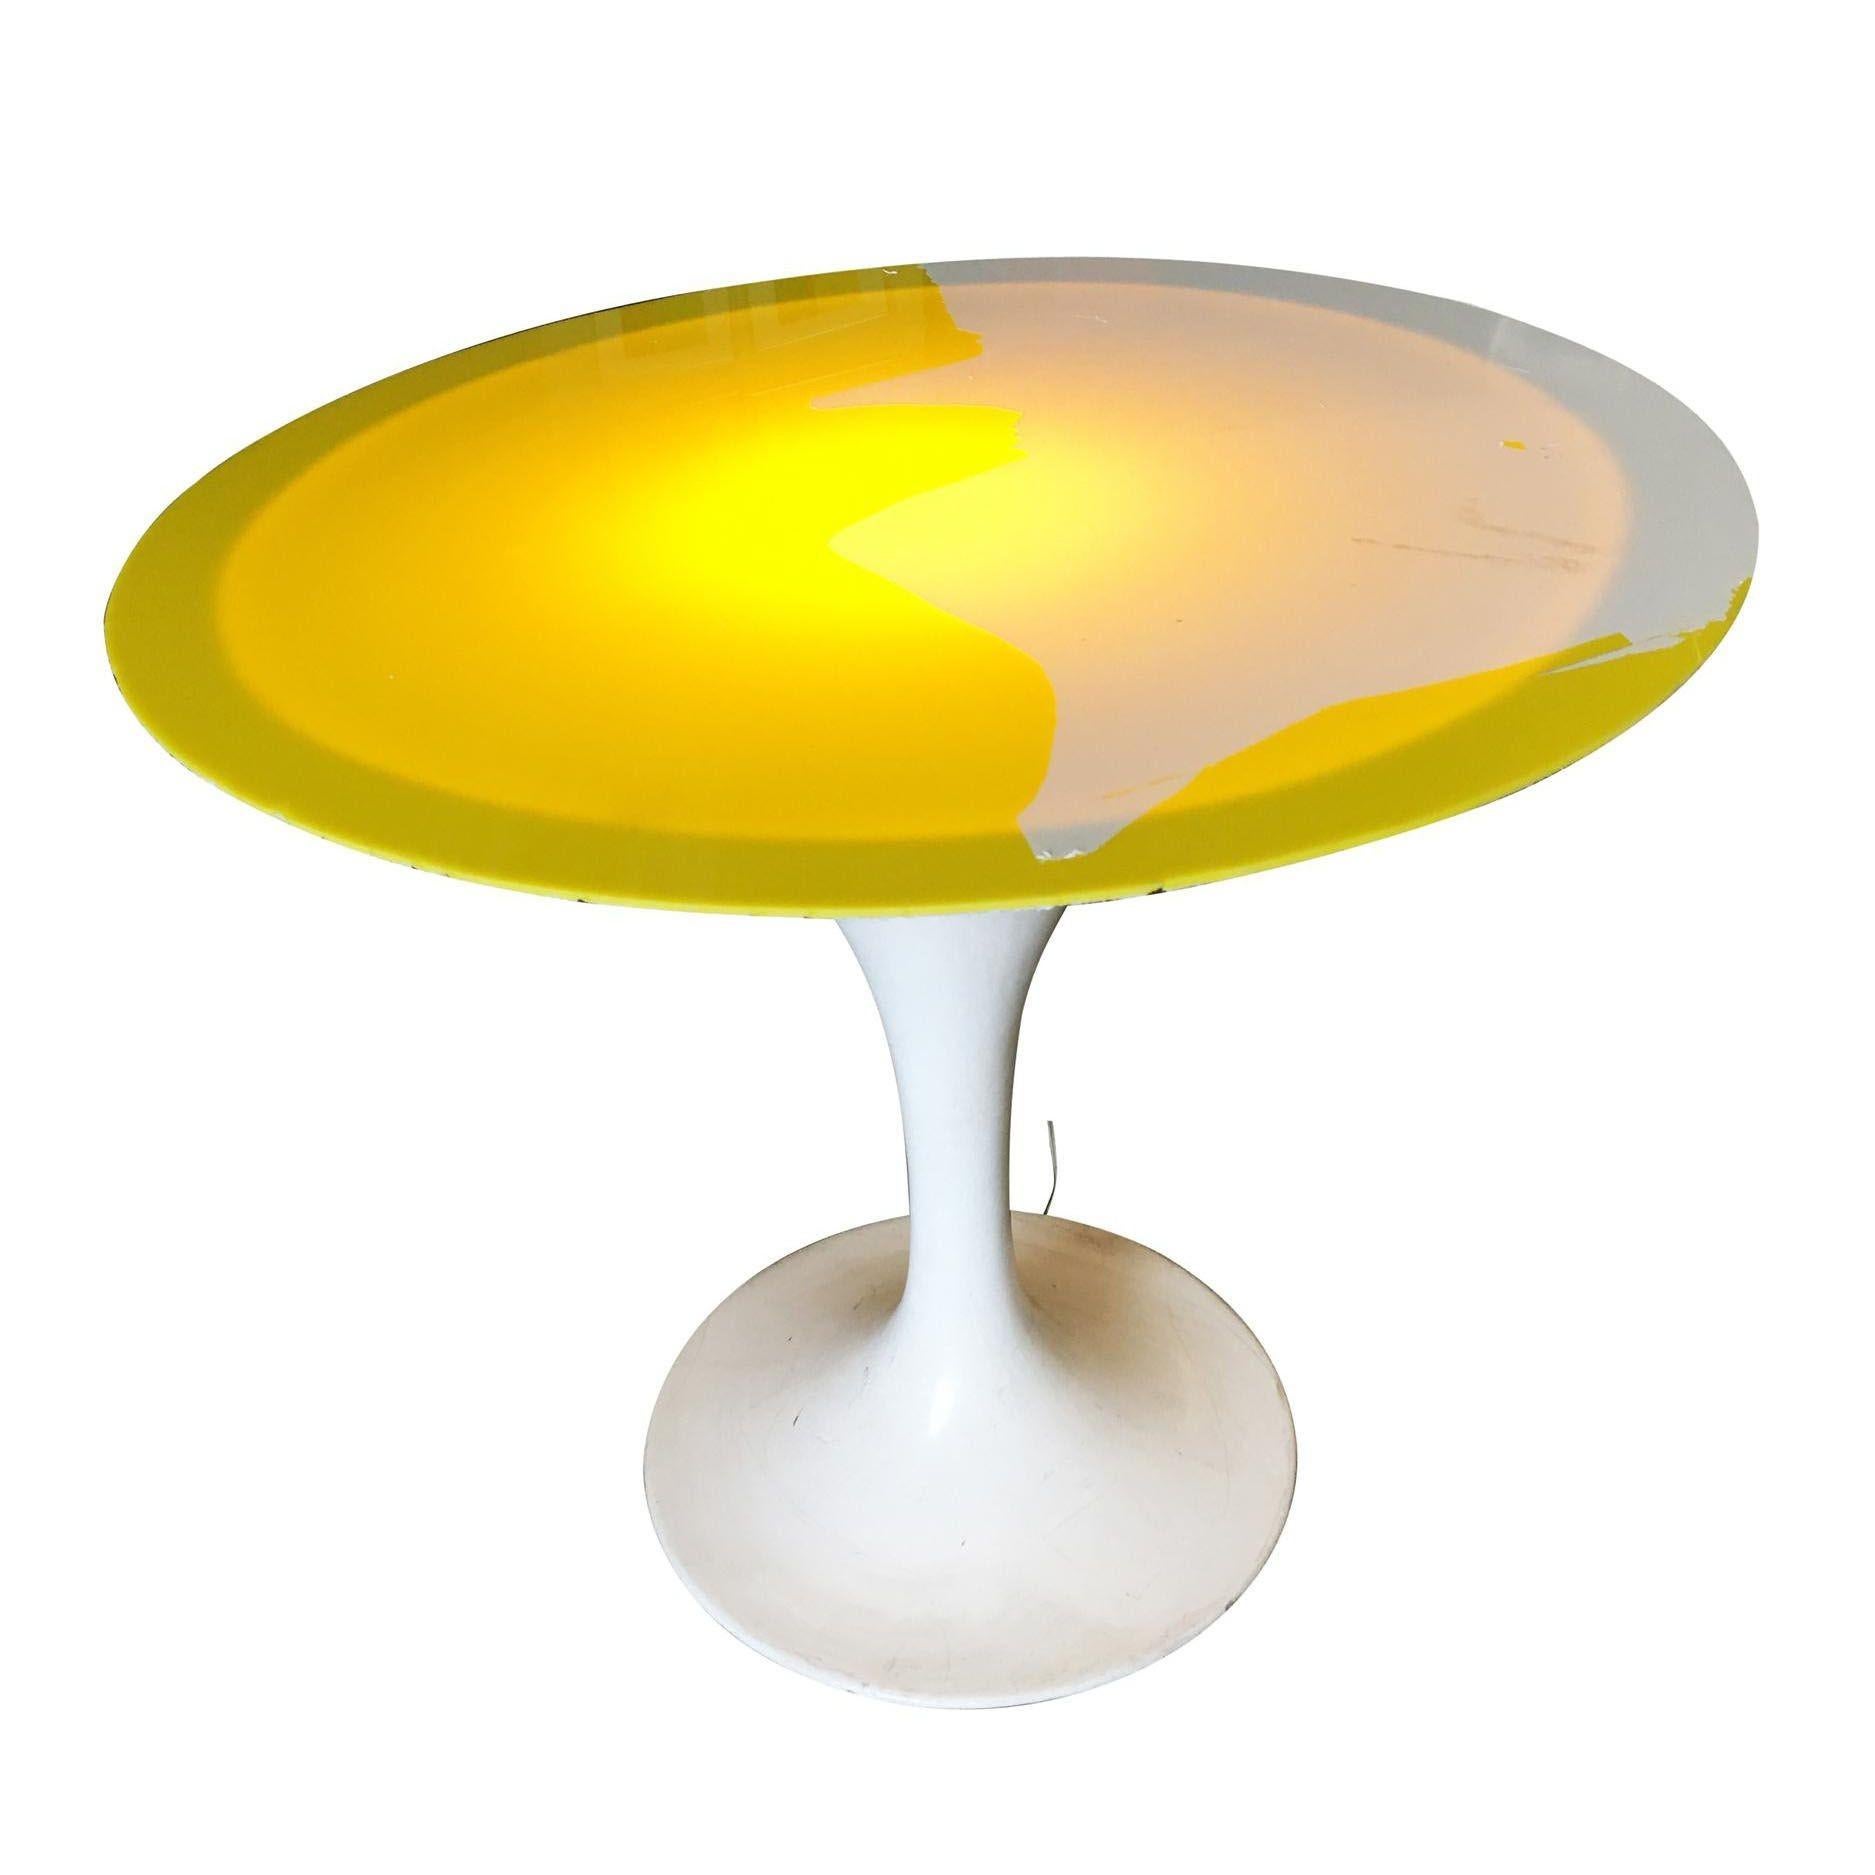 Mid-20th Century Modernist Light Up Tulip Style Coffee Table For Sale